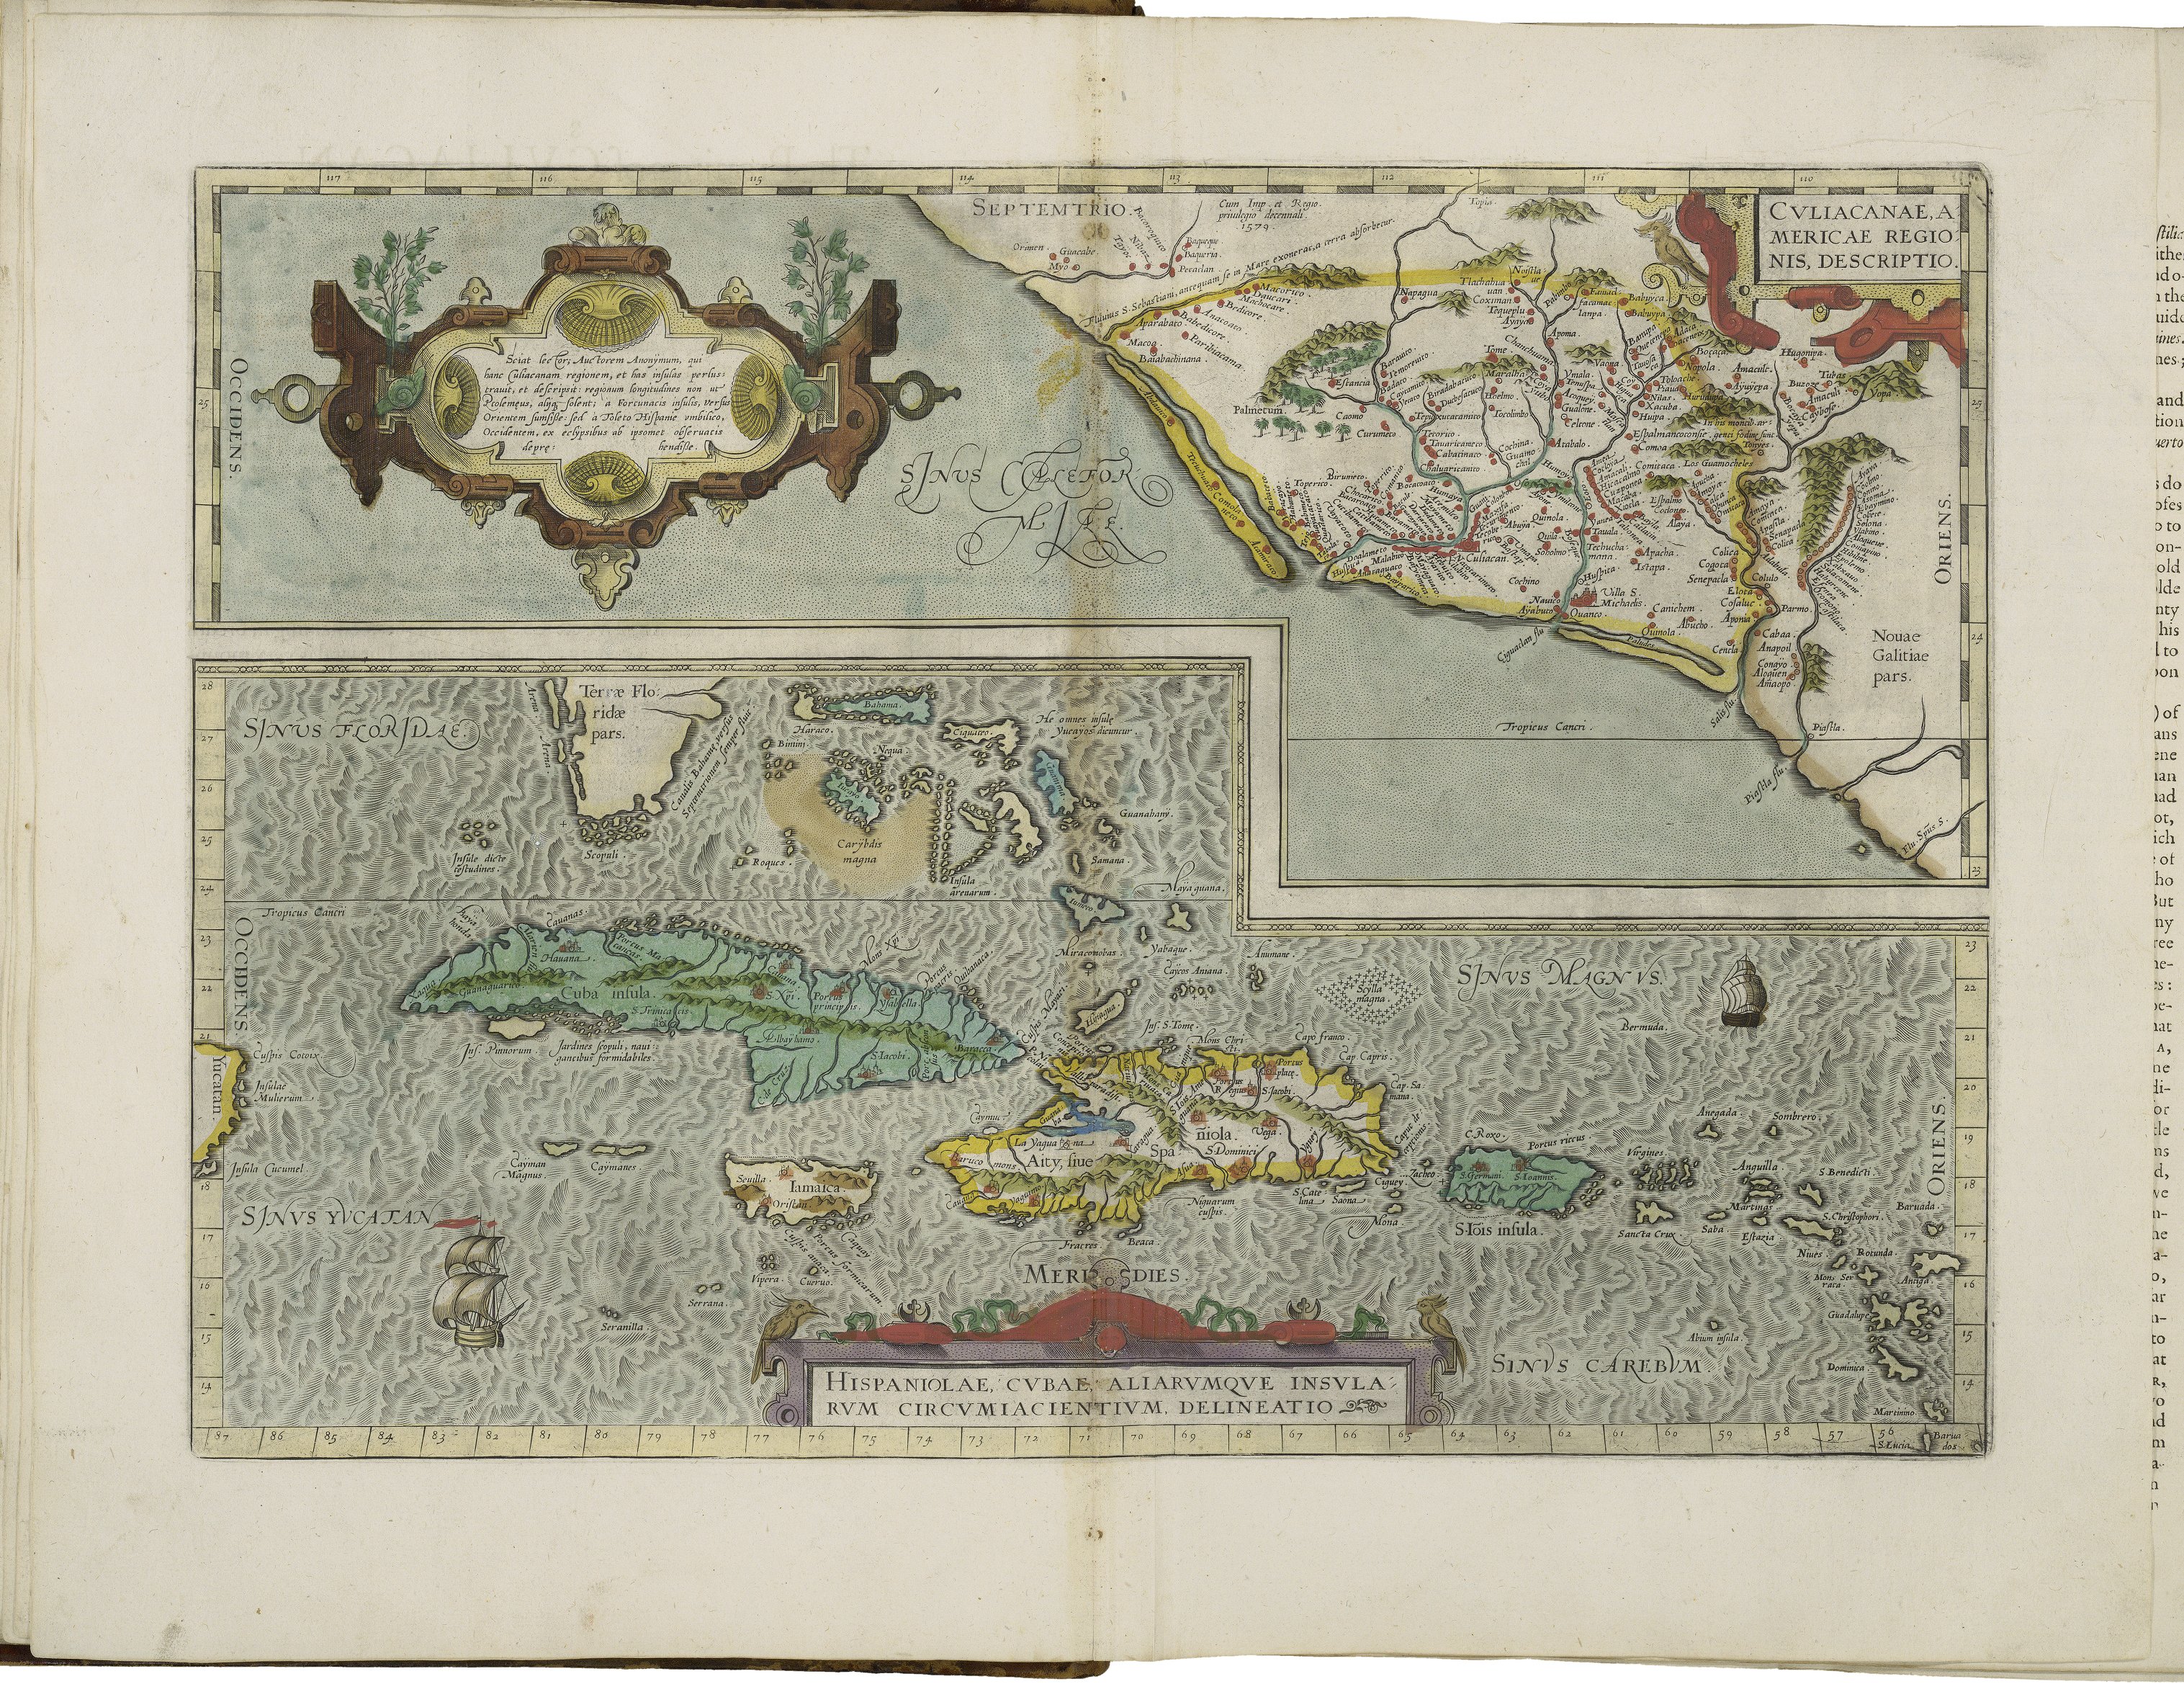 Maps of Culiacán and of Hispaniola and Cuba by Abraham Ortelius